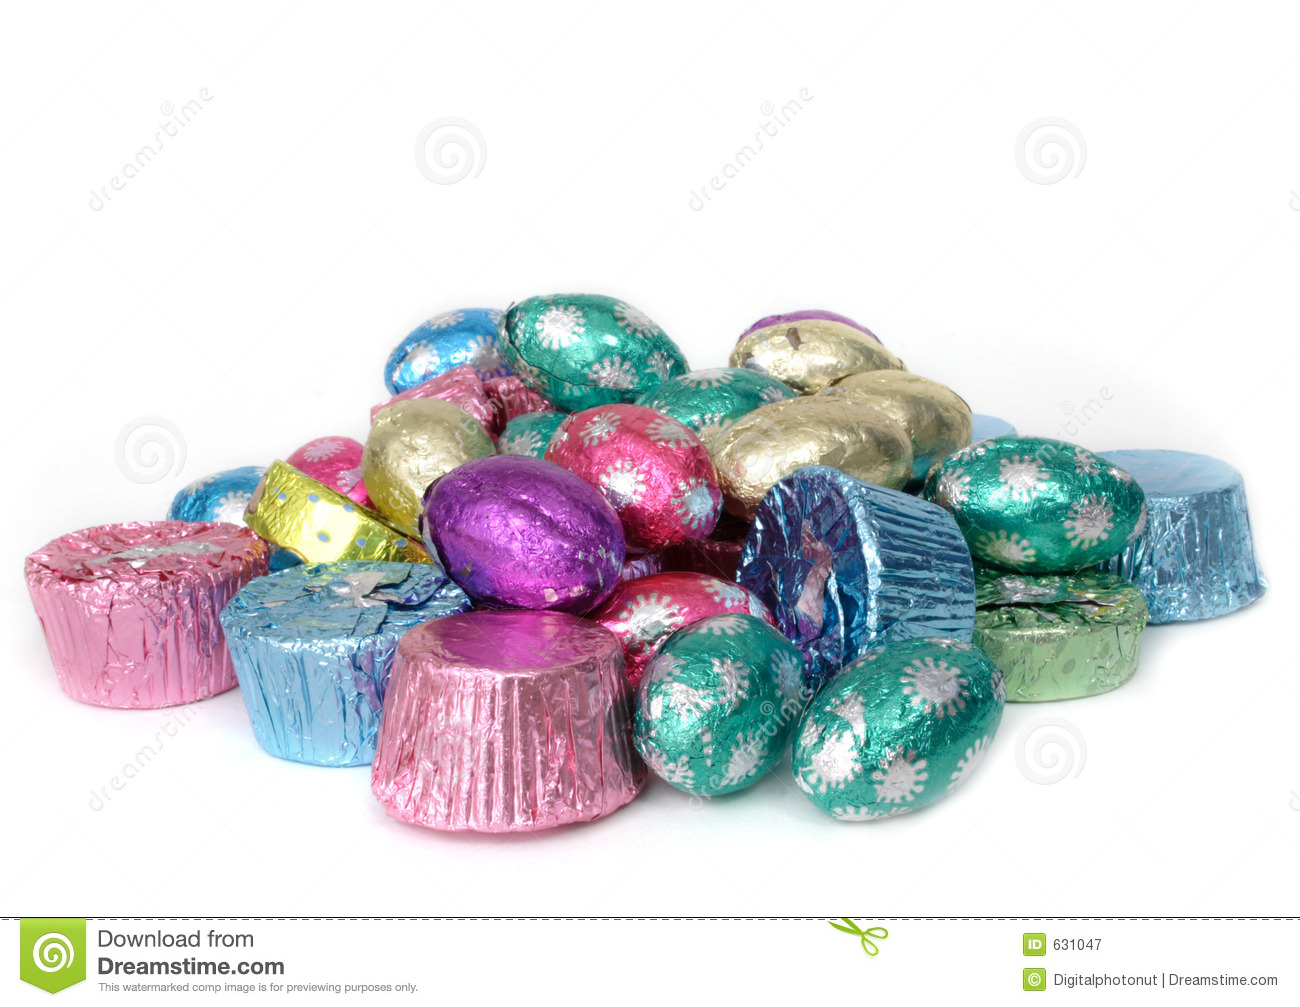 candy clipart easter